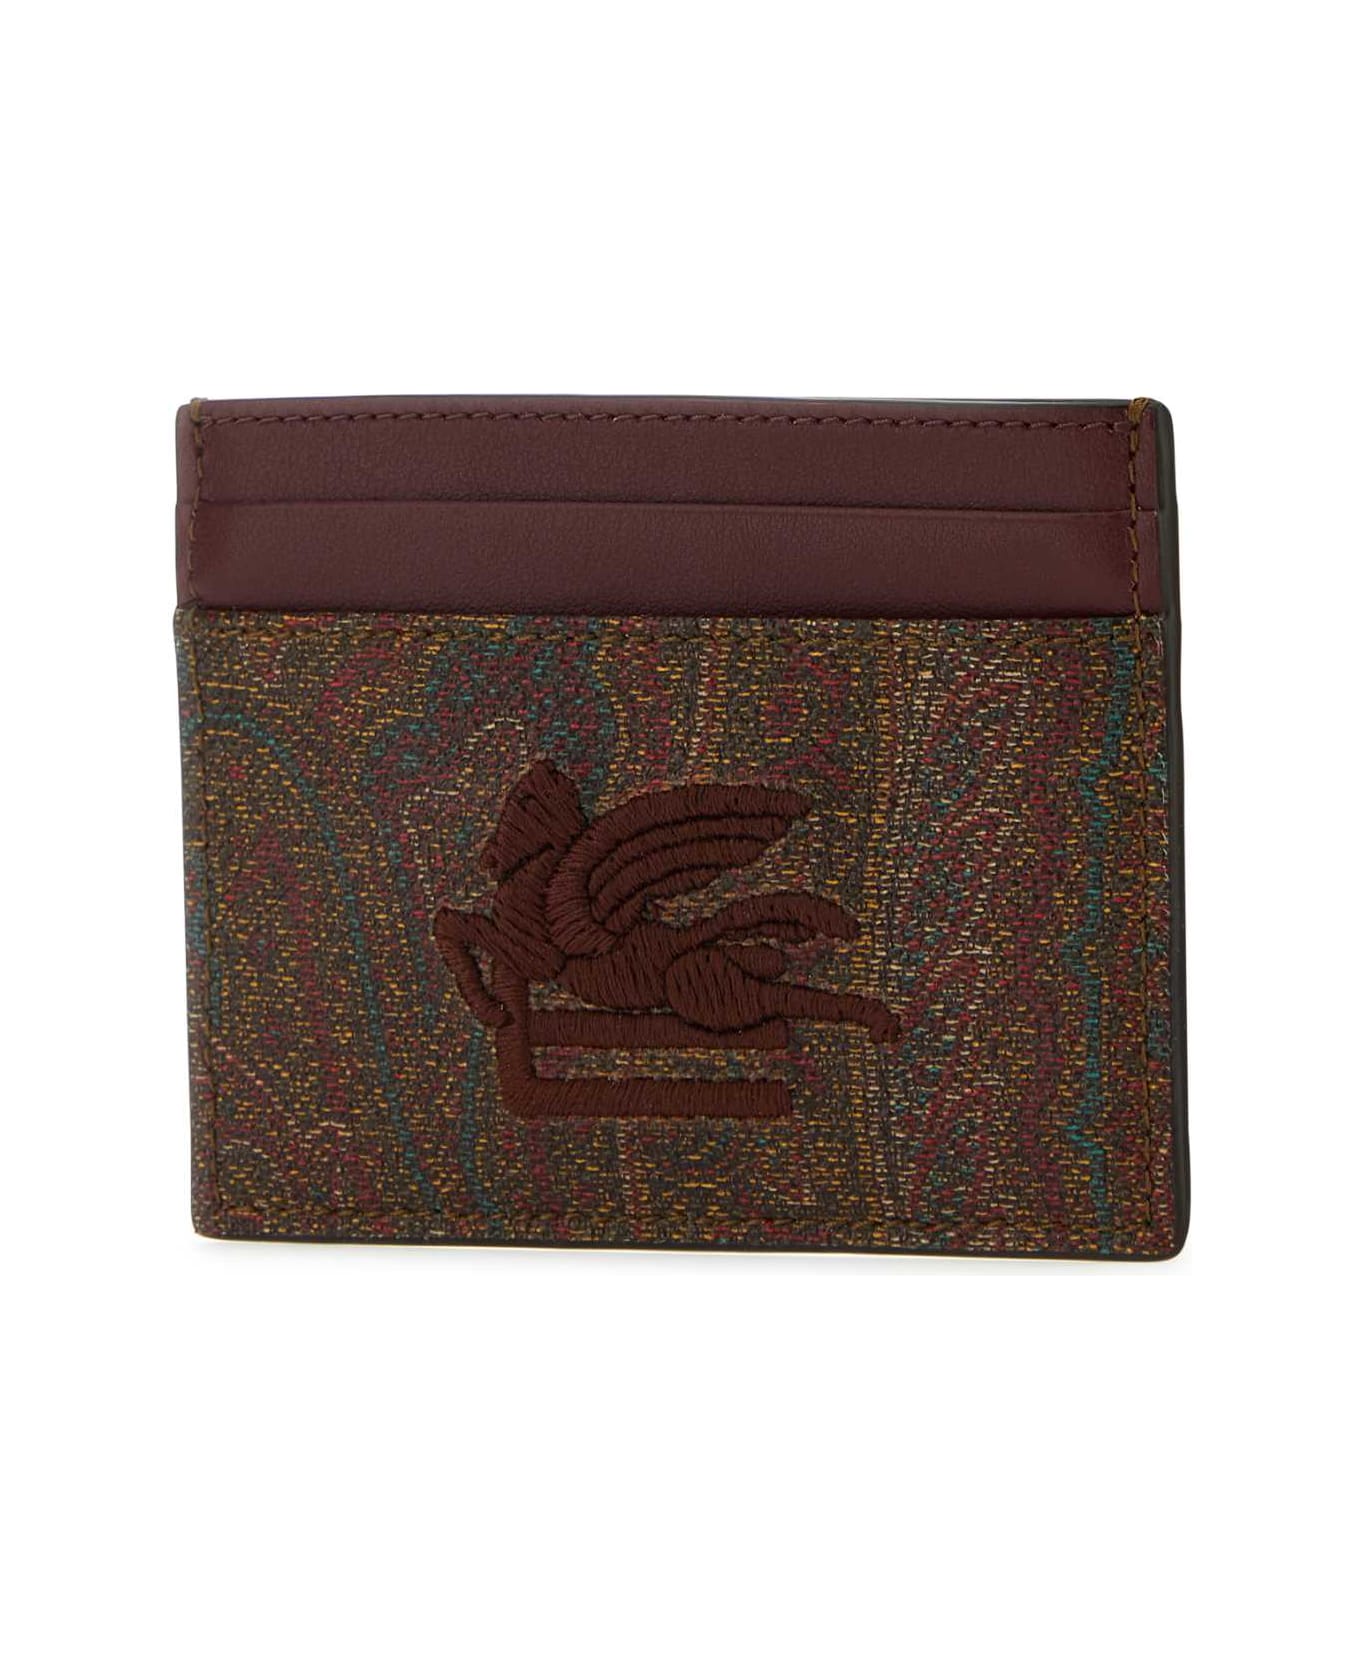 Etro Multicolor Canvas And Leather Card Holder - 600 財布